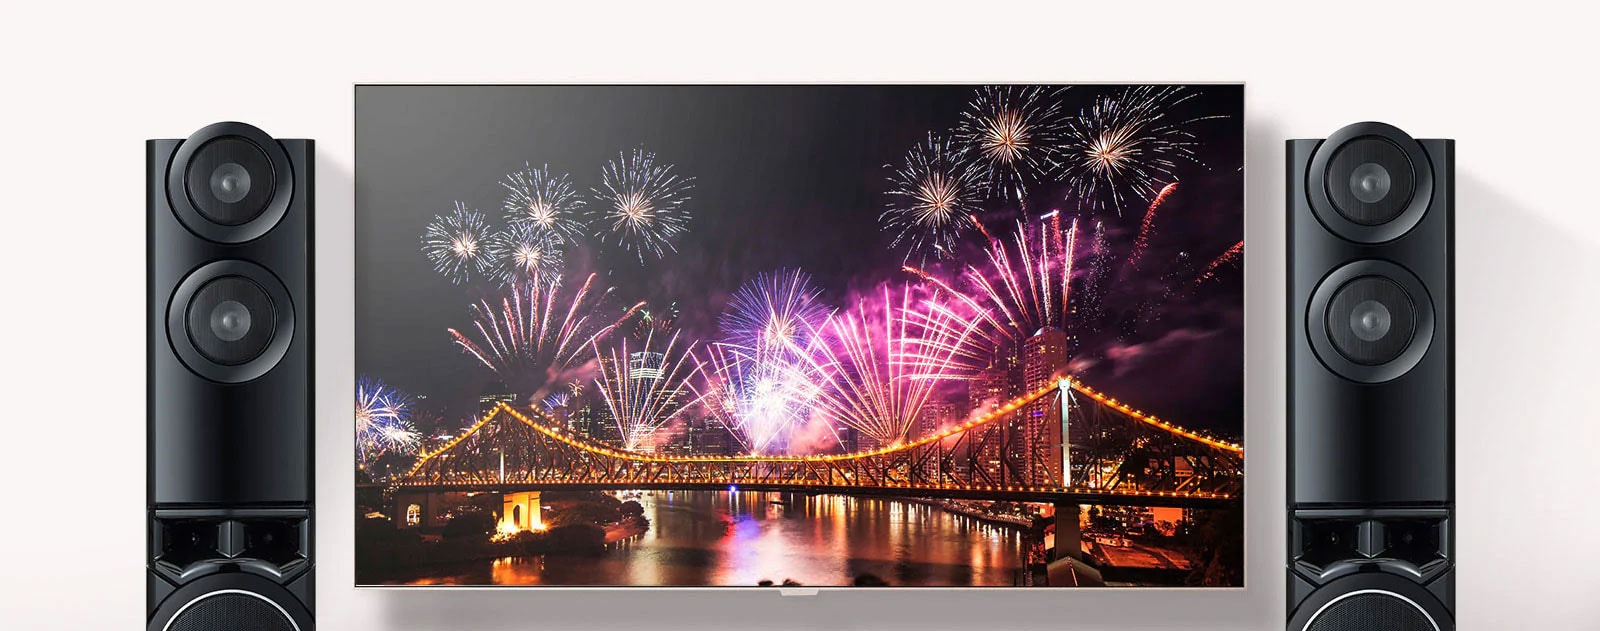 Between the two speakers, TV is on a wall. TV Shows fireworks spreading over the bridge.